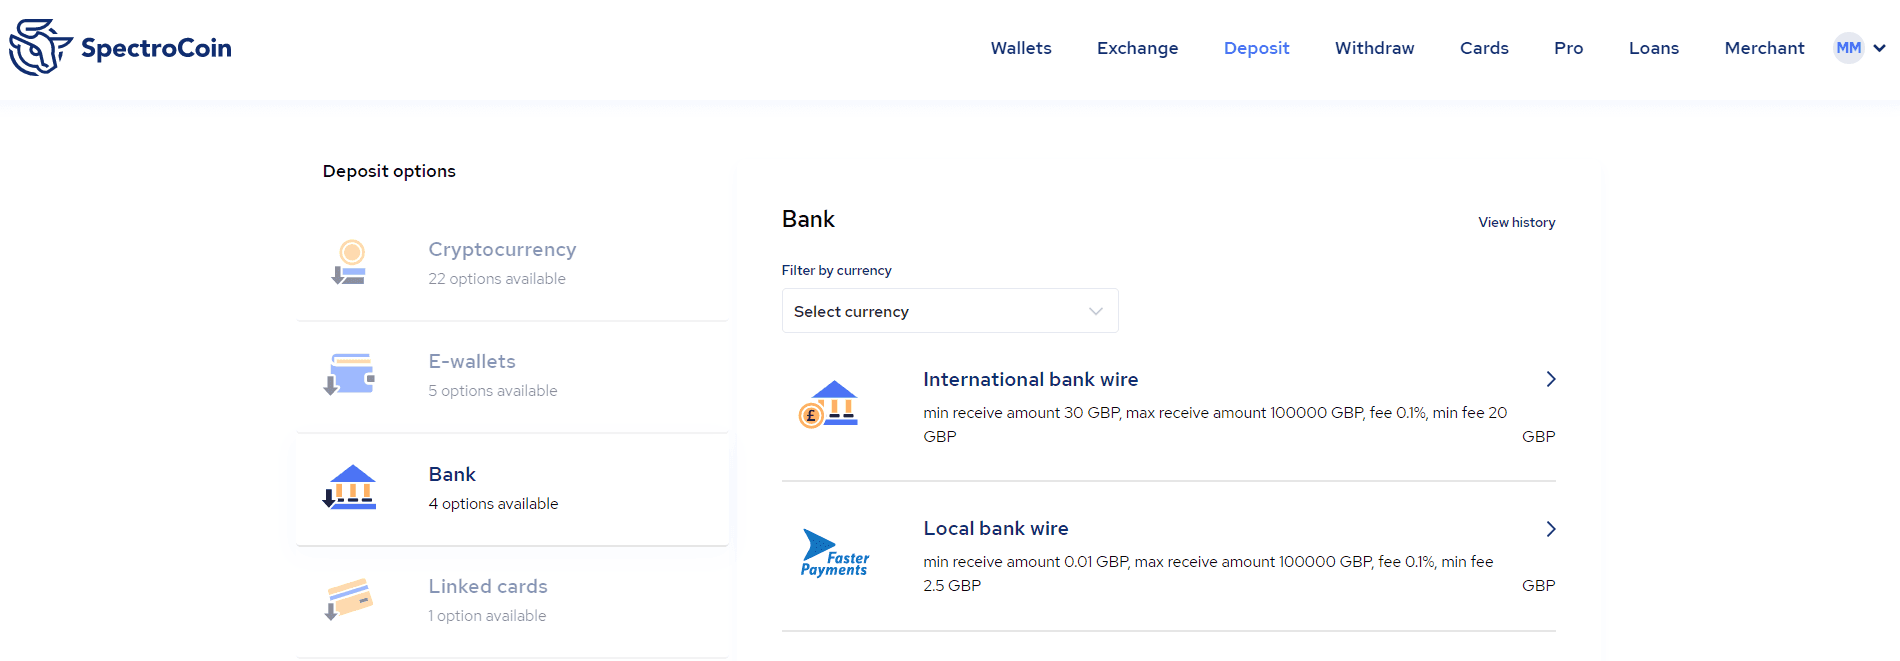 First, choose the International bank wire option in the deposit section of your SpectroCoin account.